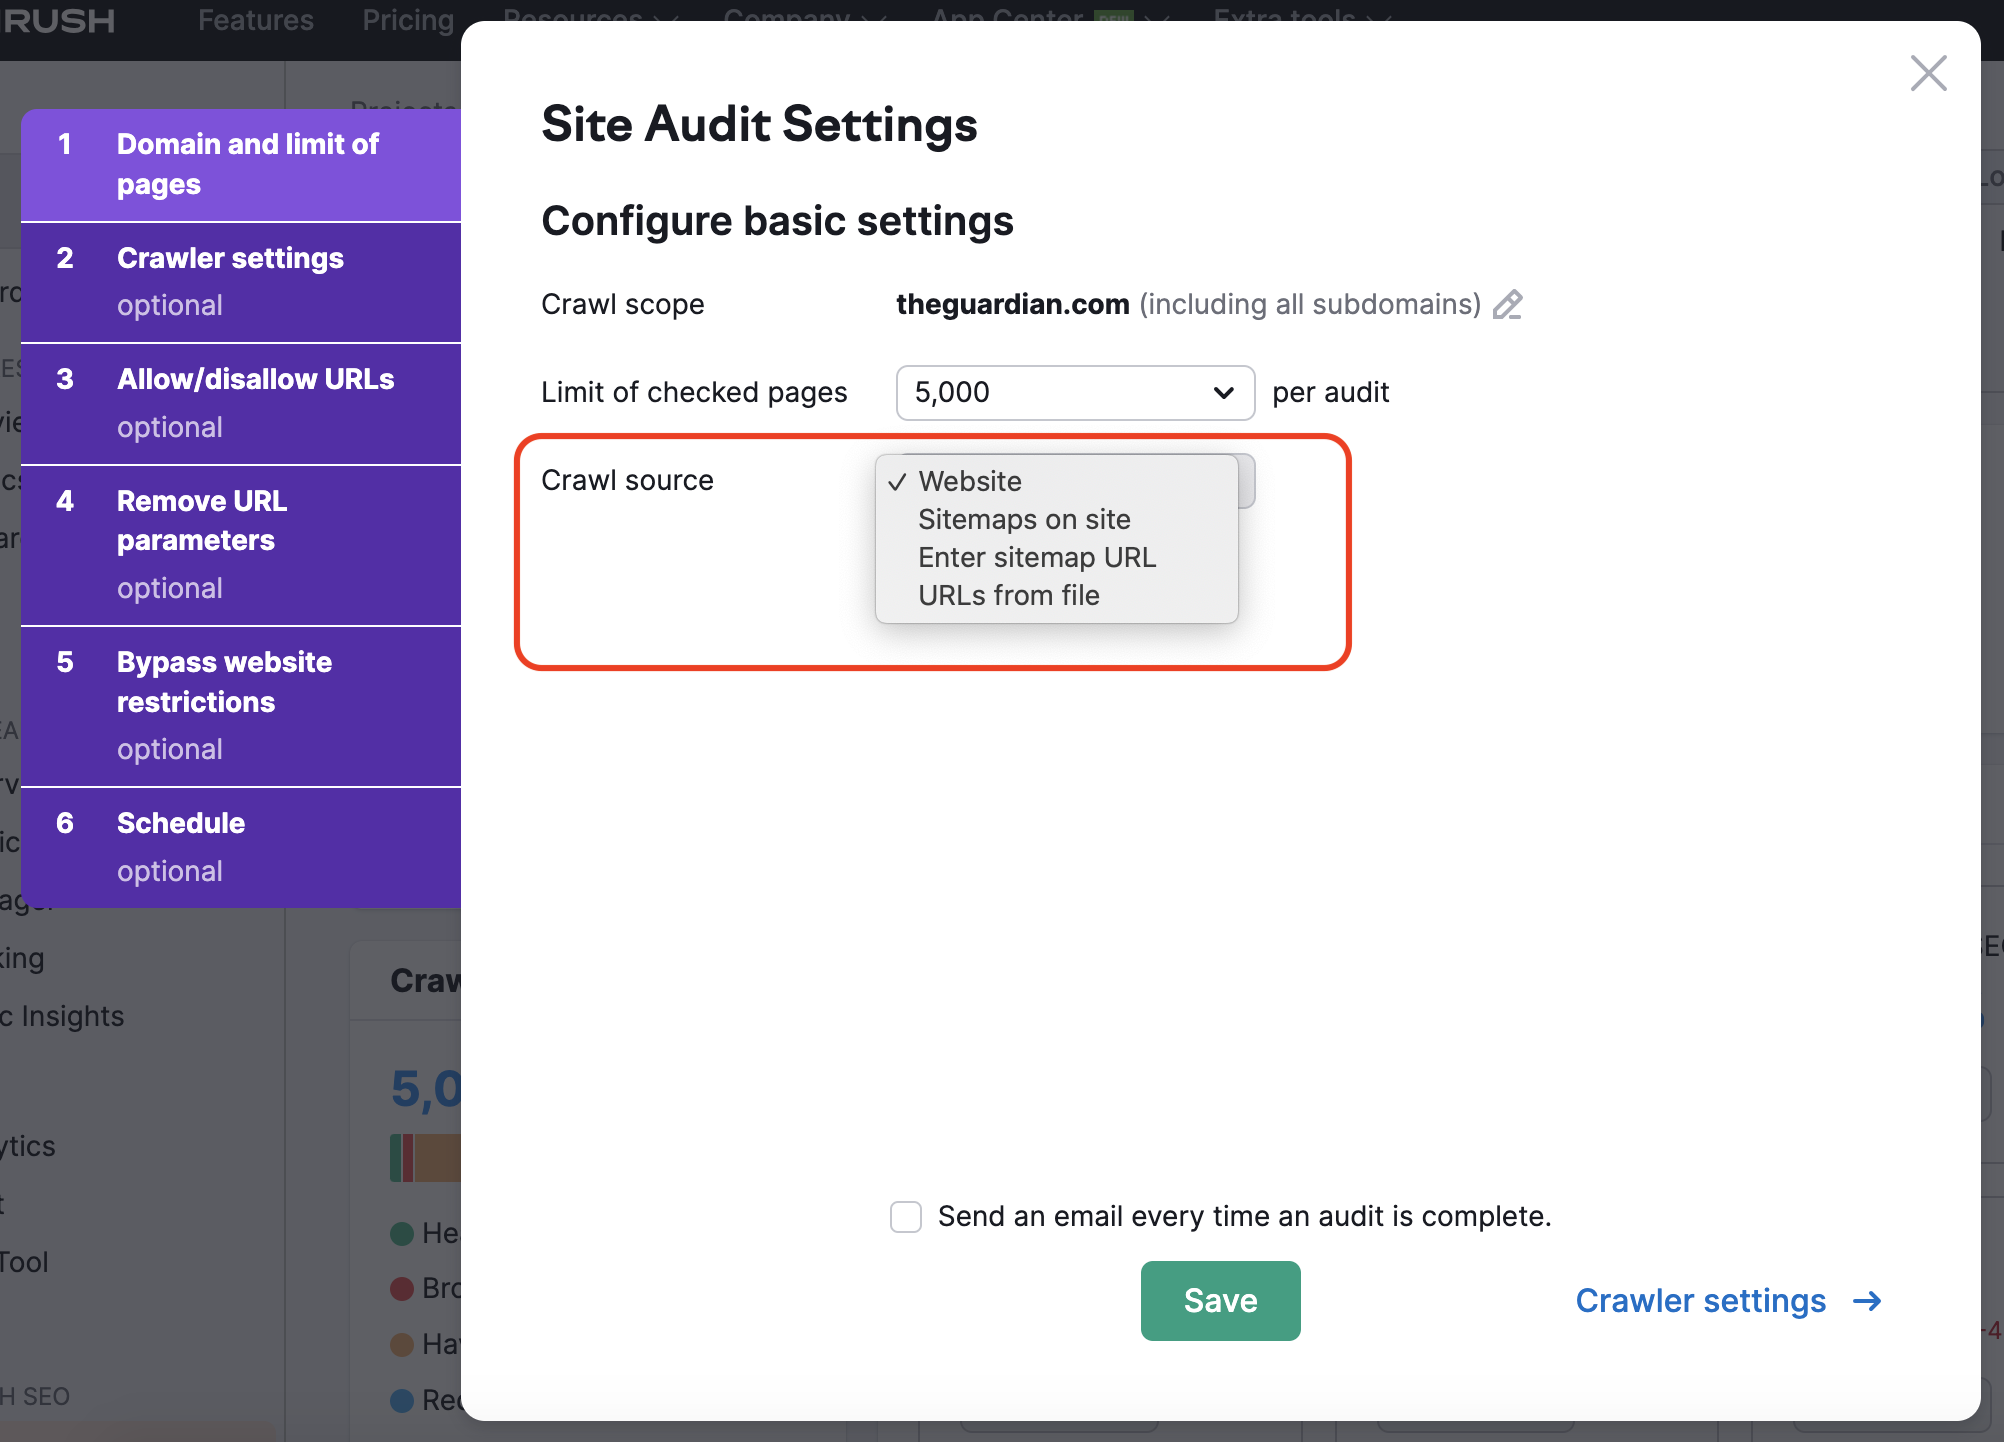 Demonstration on where to find the Crawl Source settings in Site Audit. The dropdown menu is highlighted and features all available Crawl source options.